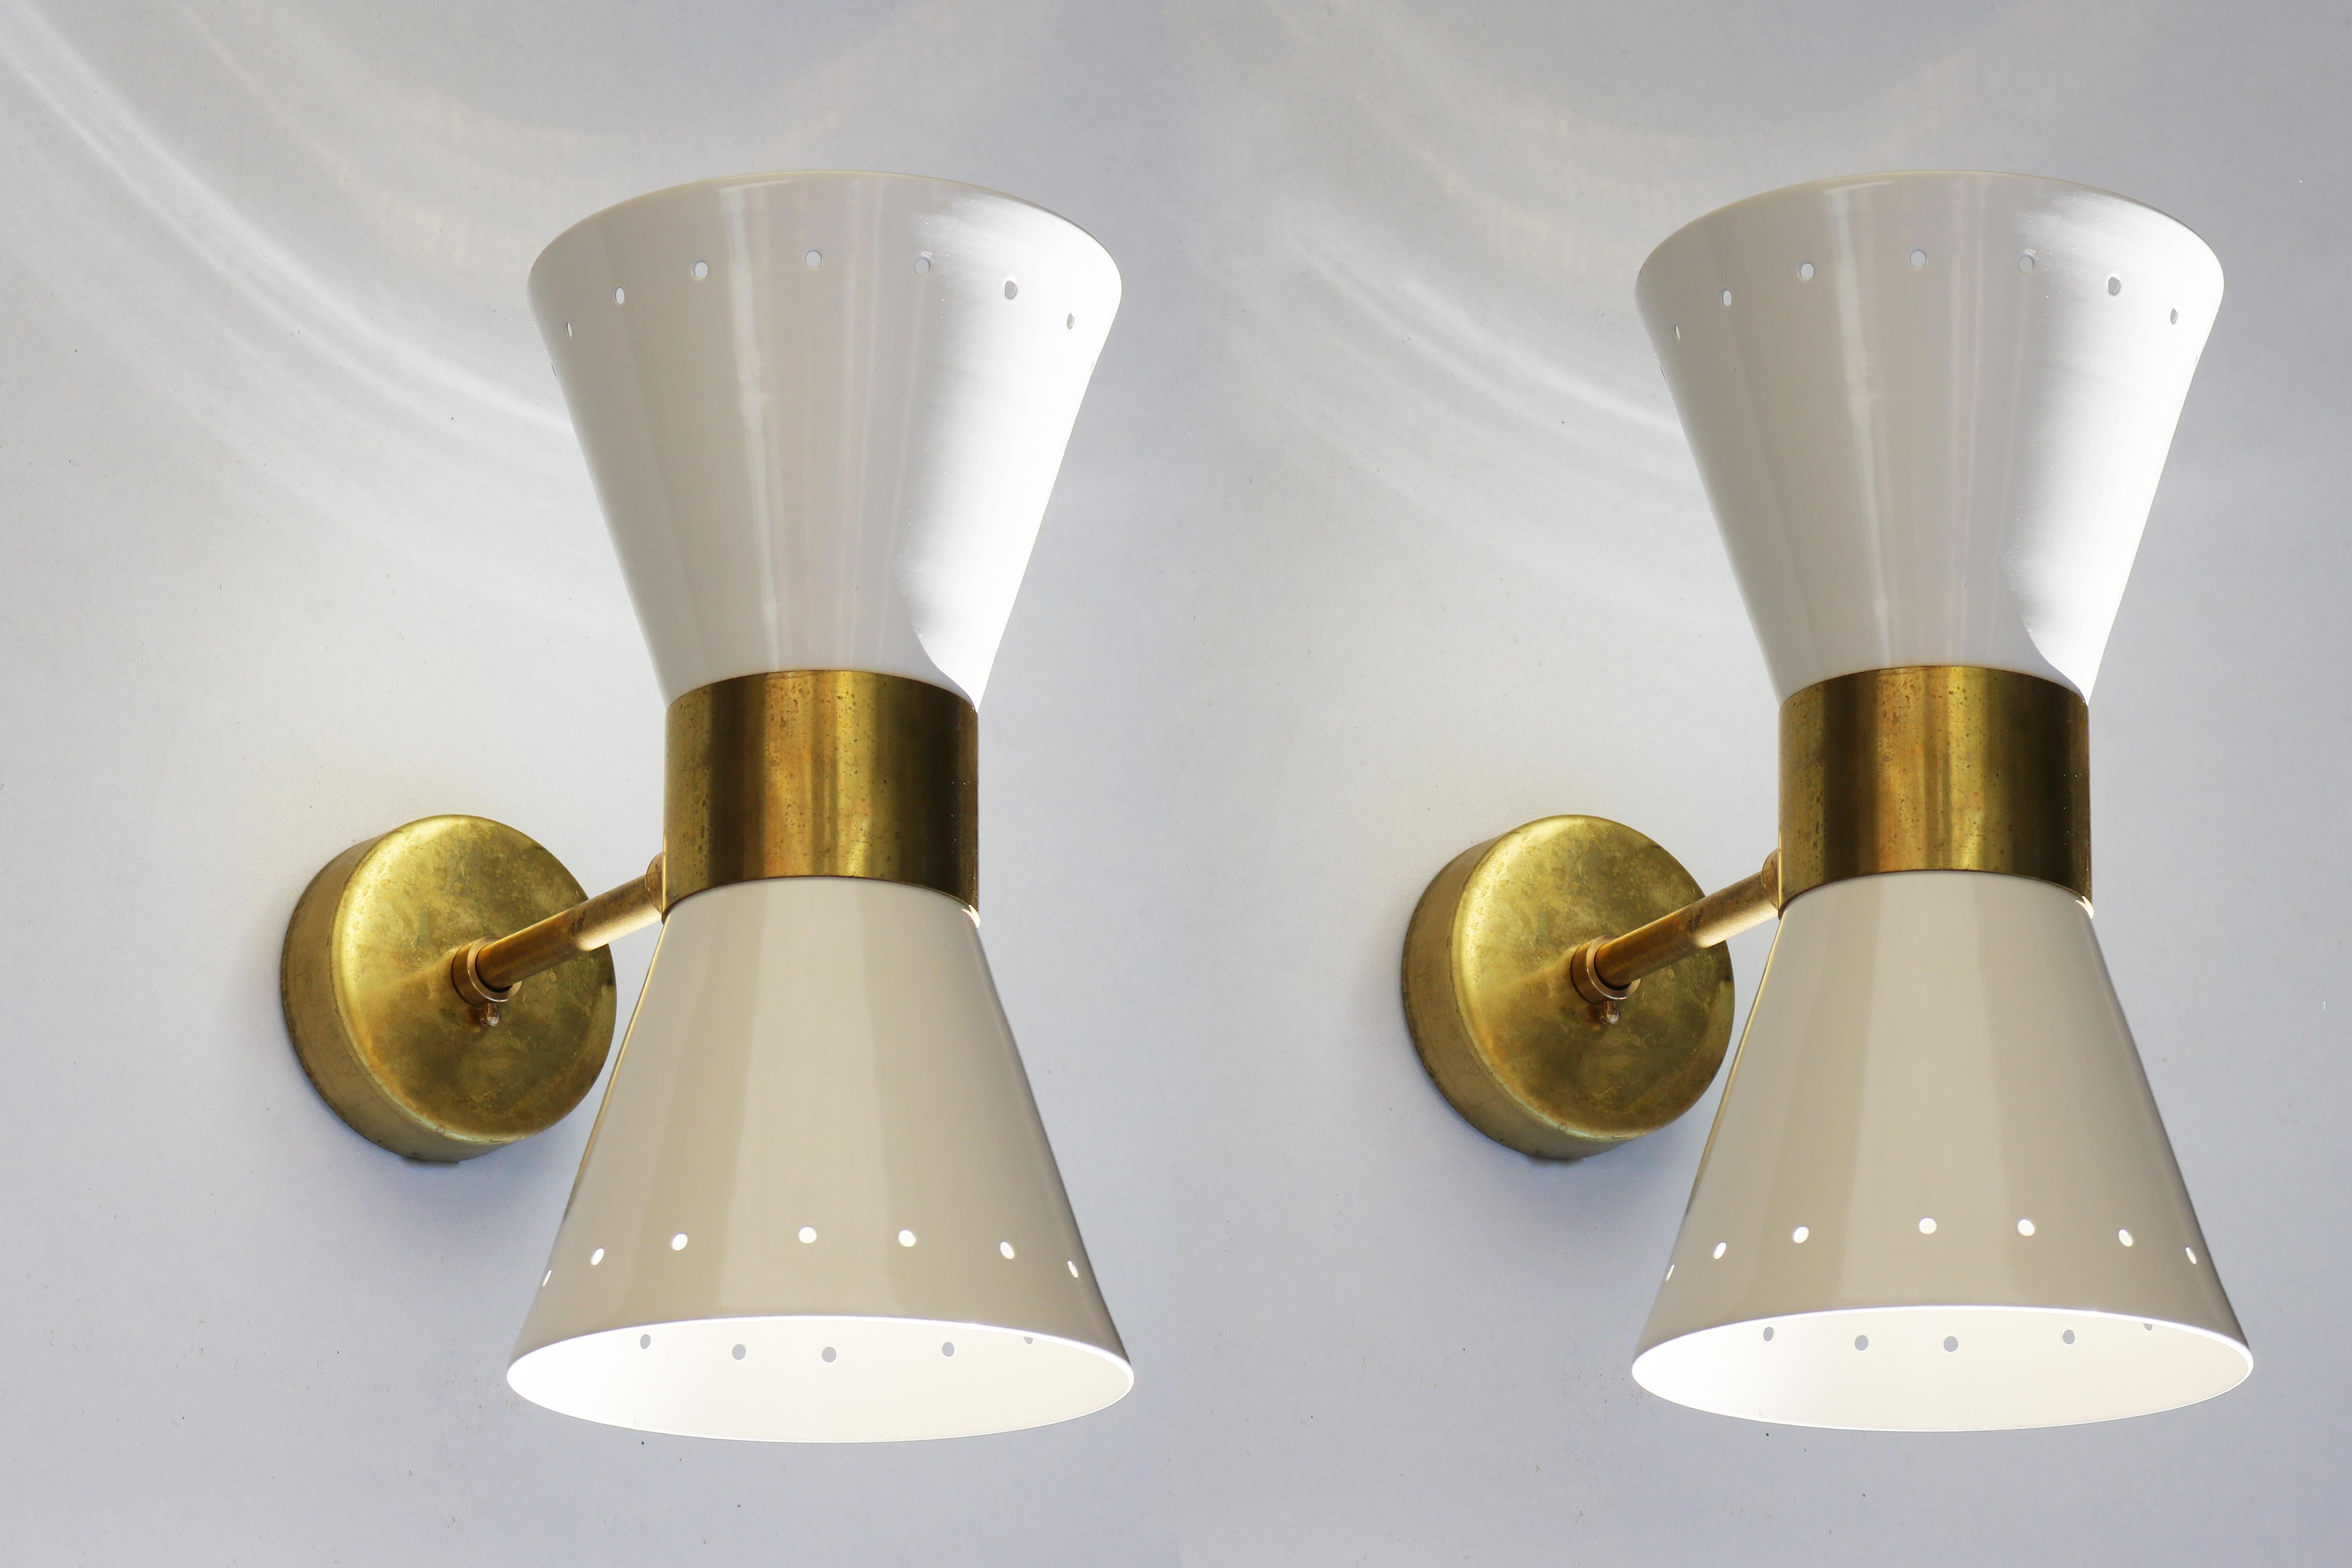 Rare set of gorgeous Italian design Diabolo wall lights of the 1950s in the style of Stilnovo
The patinated brass combines really well with the white metal shades.
The wall lights have been rewired for daily use and look amazing.
Each wall light has